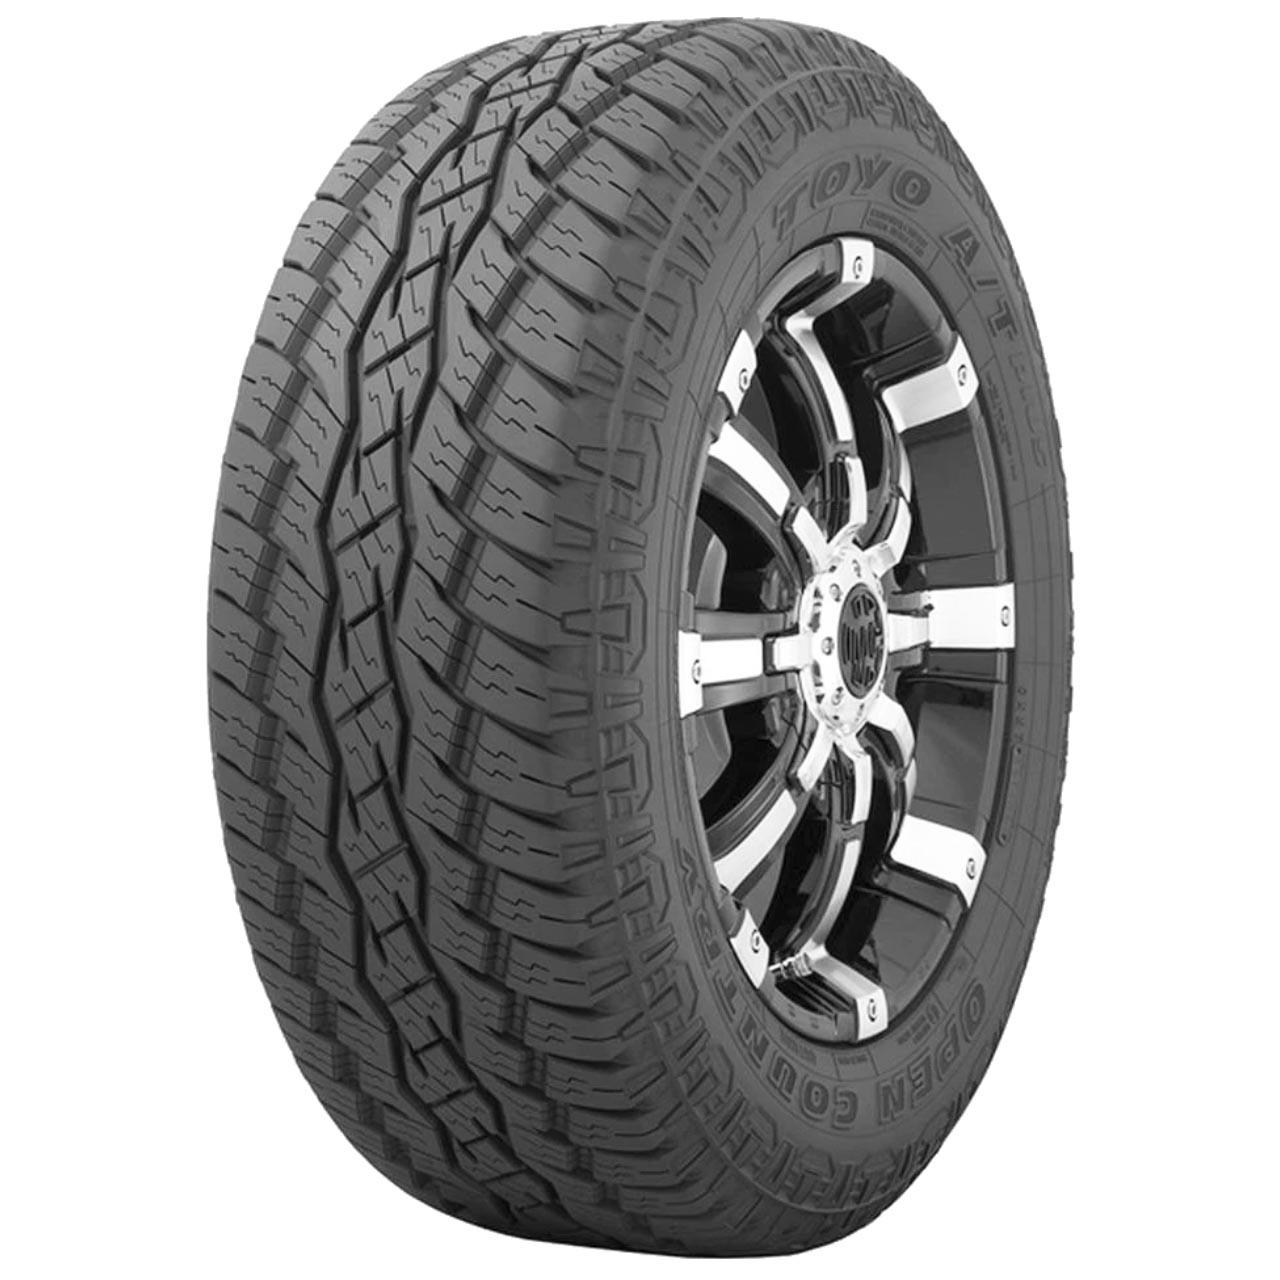 Toyo Open Country AT Plus 205/70R15 96S